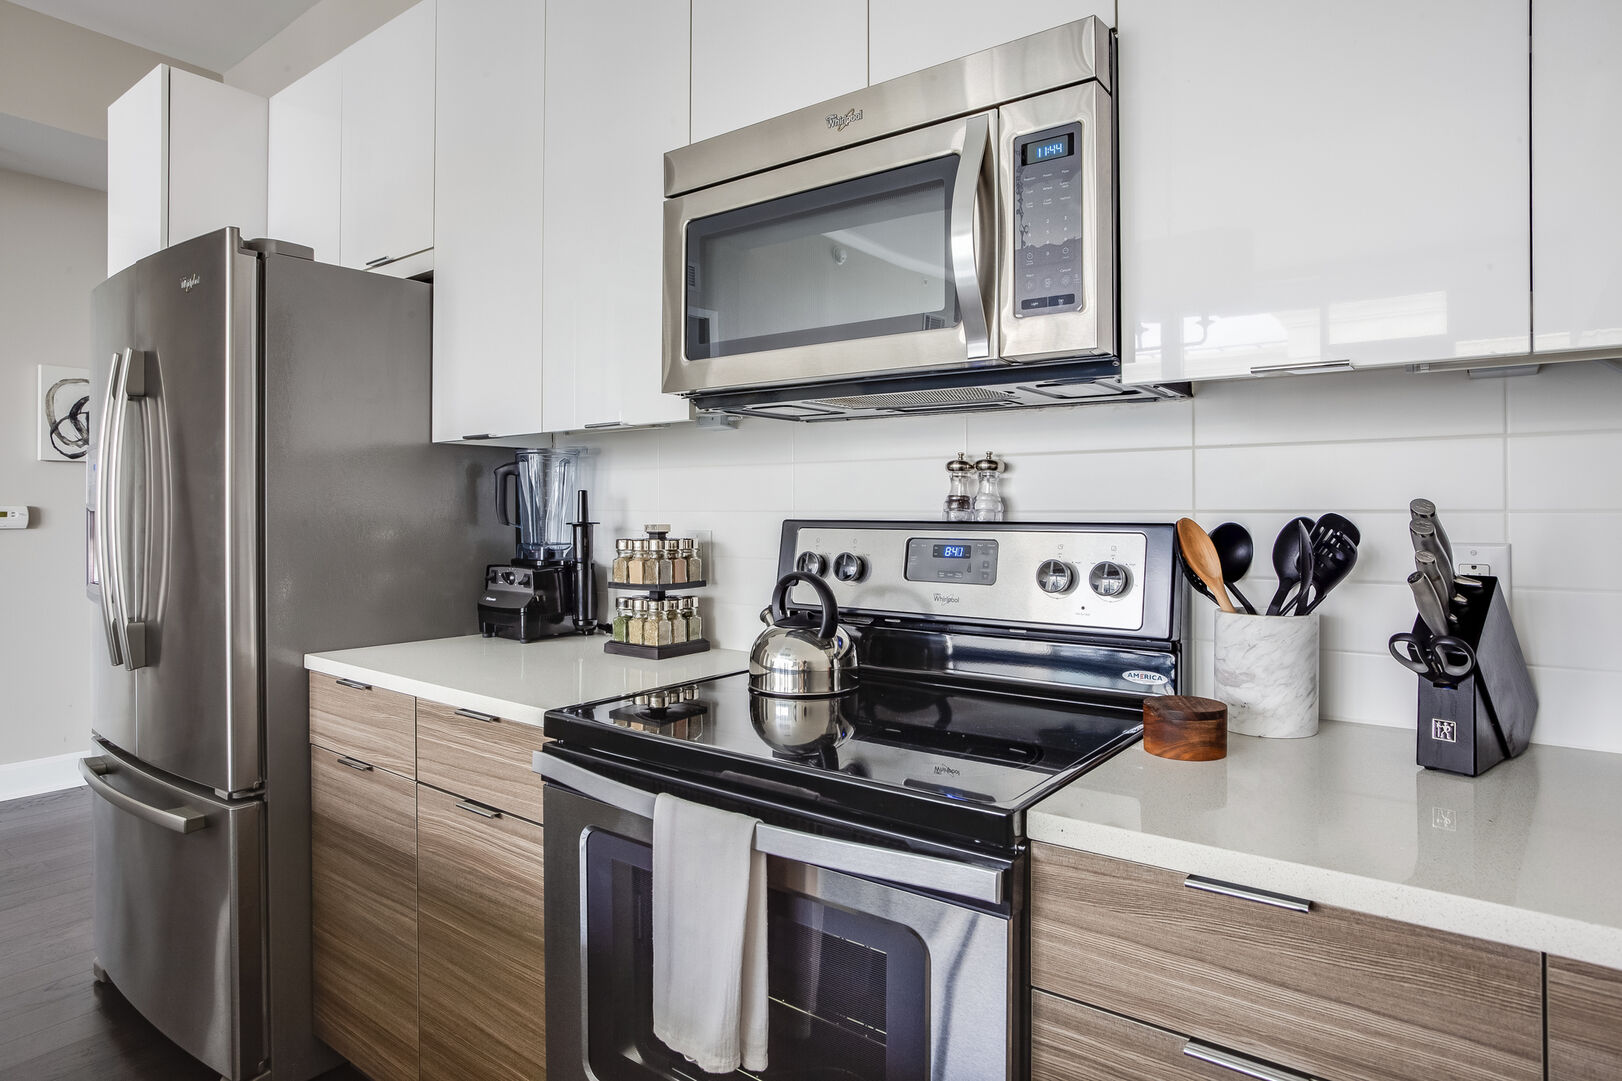 This Atlanta Vacation Rental features a kitchen with microwave, oven, and stove